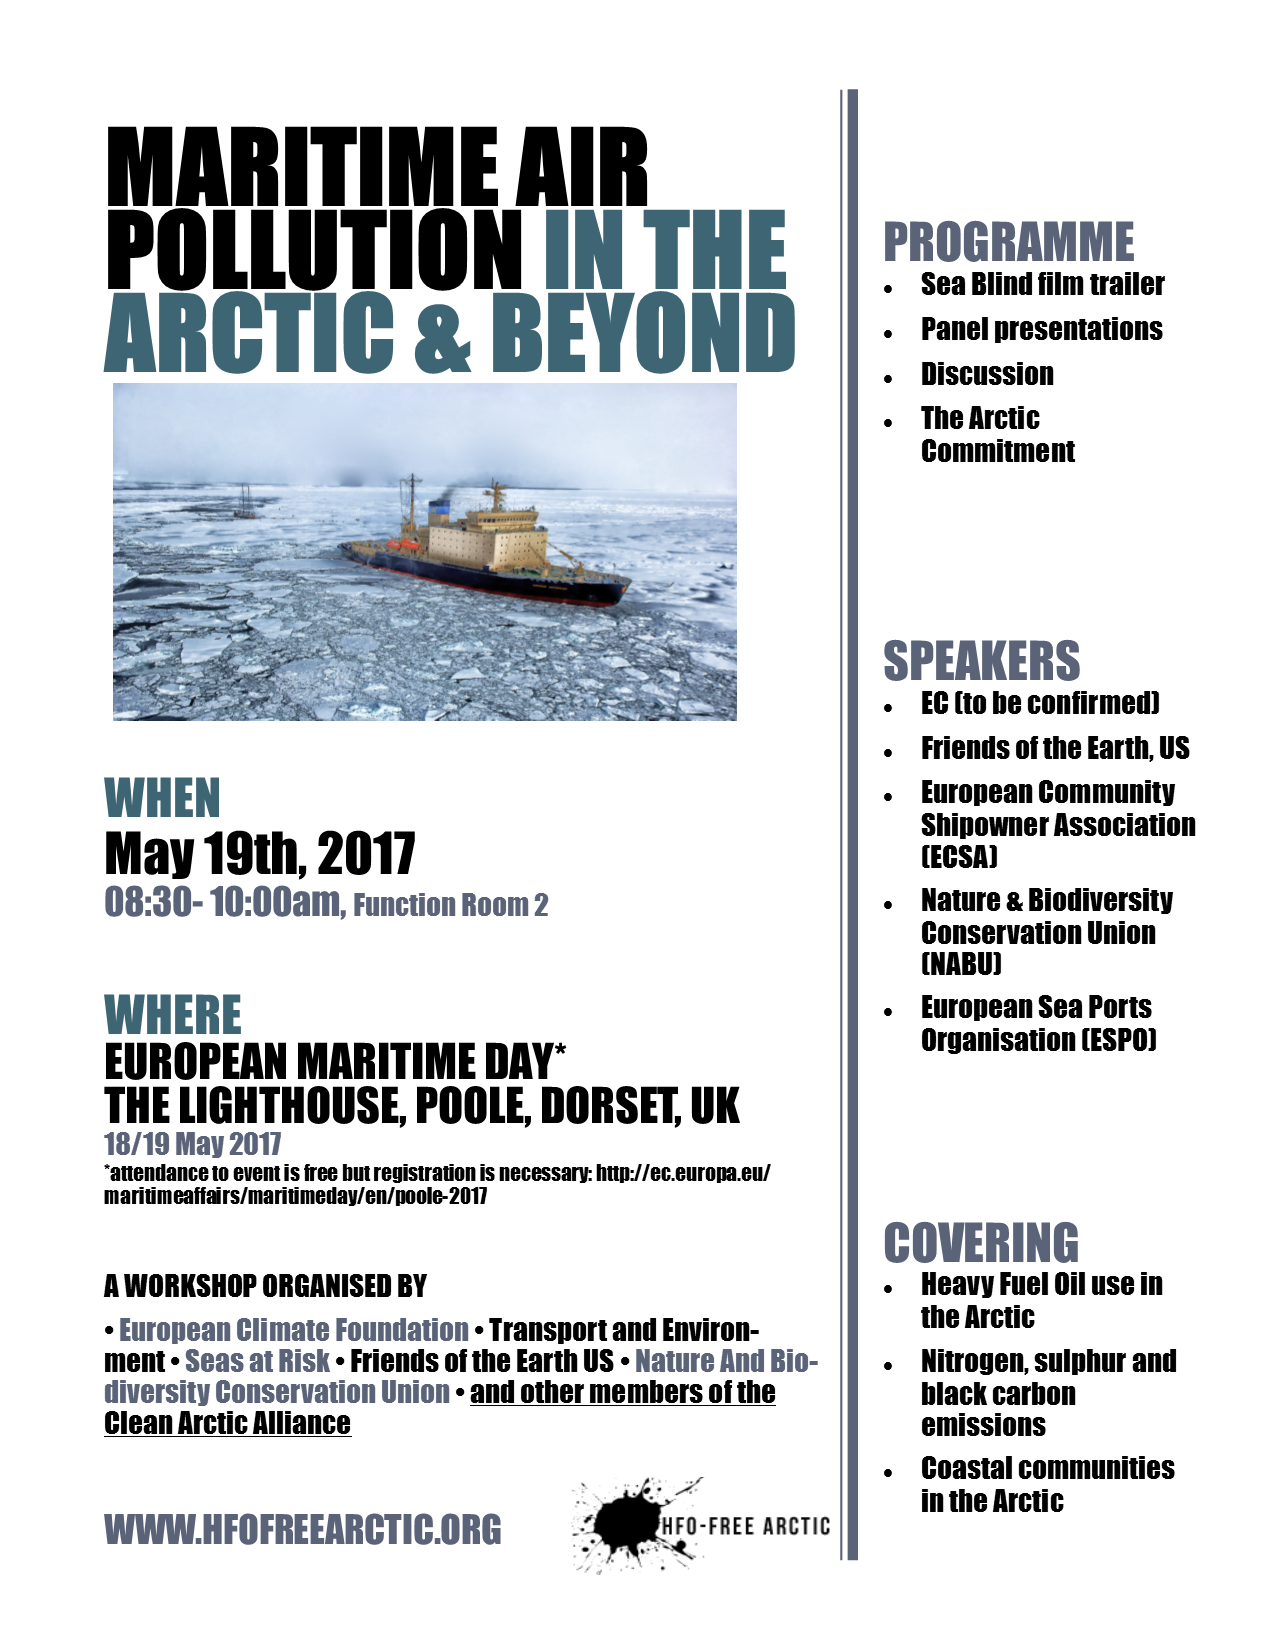 Event: Maritime Pollution in the Arctic & Beyond